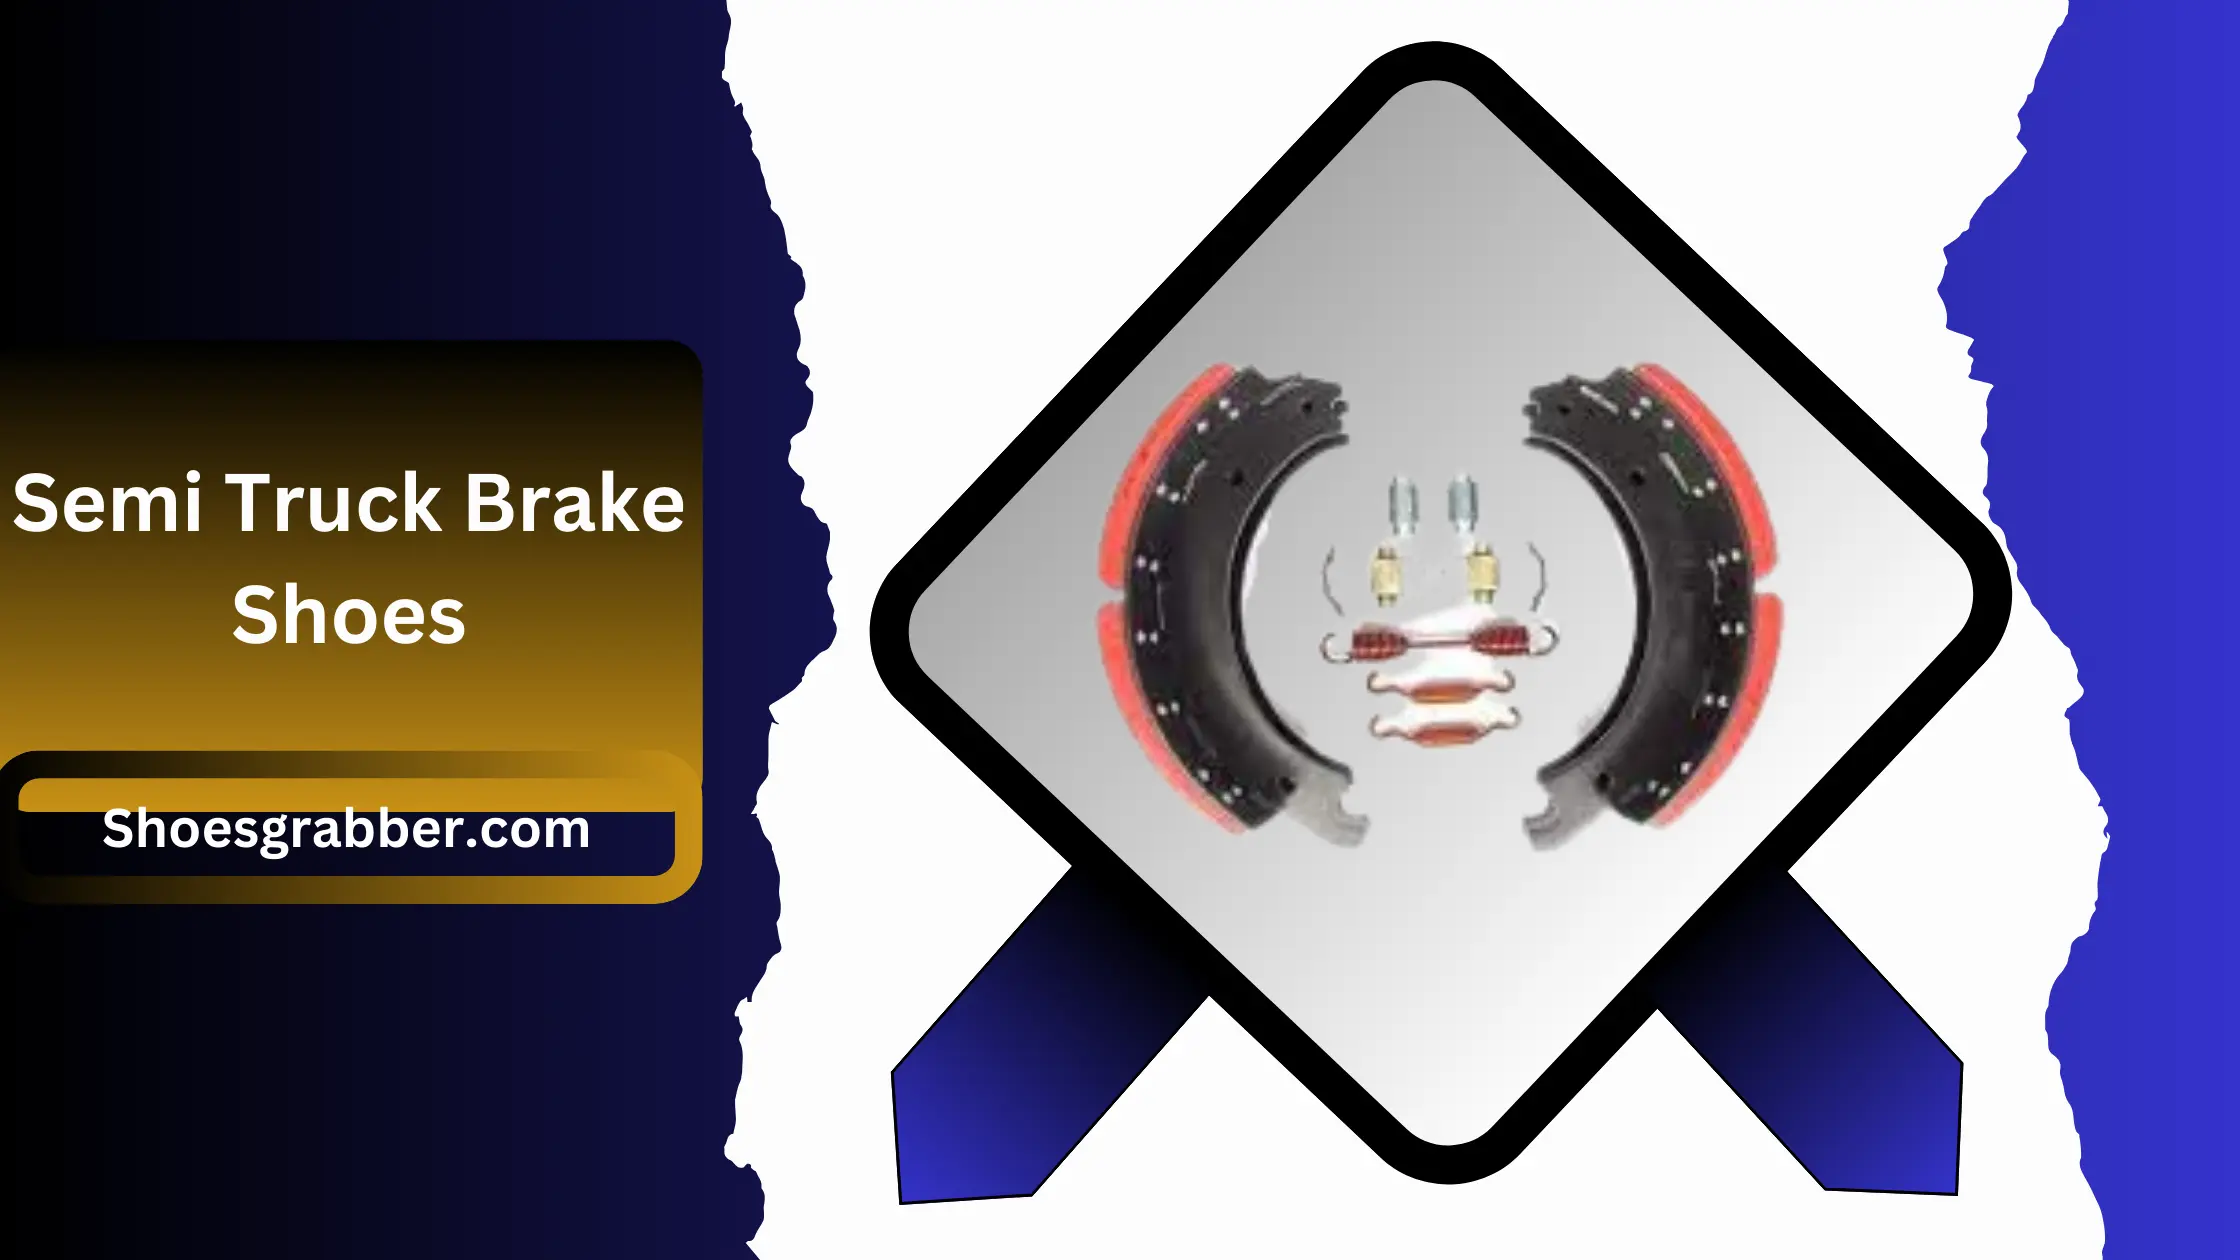 How To Measure Semi Truck Brake Shoes - A Pro Mechanic’s Guide